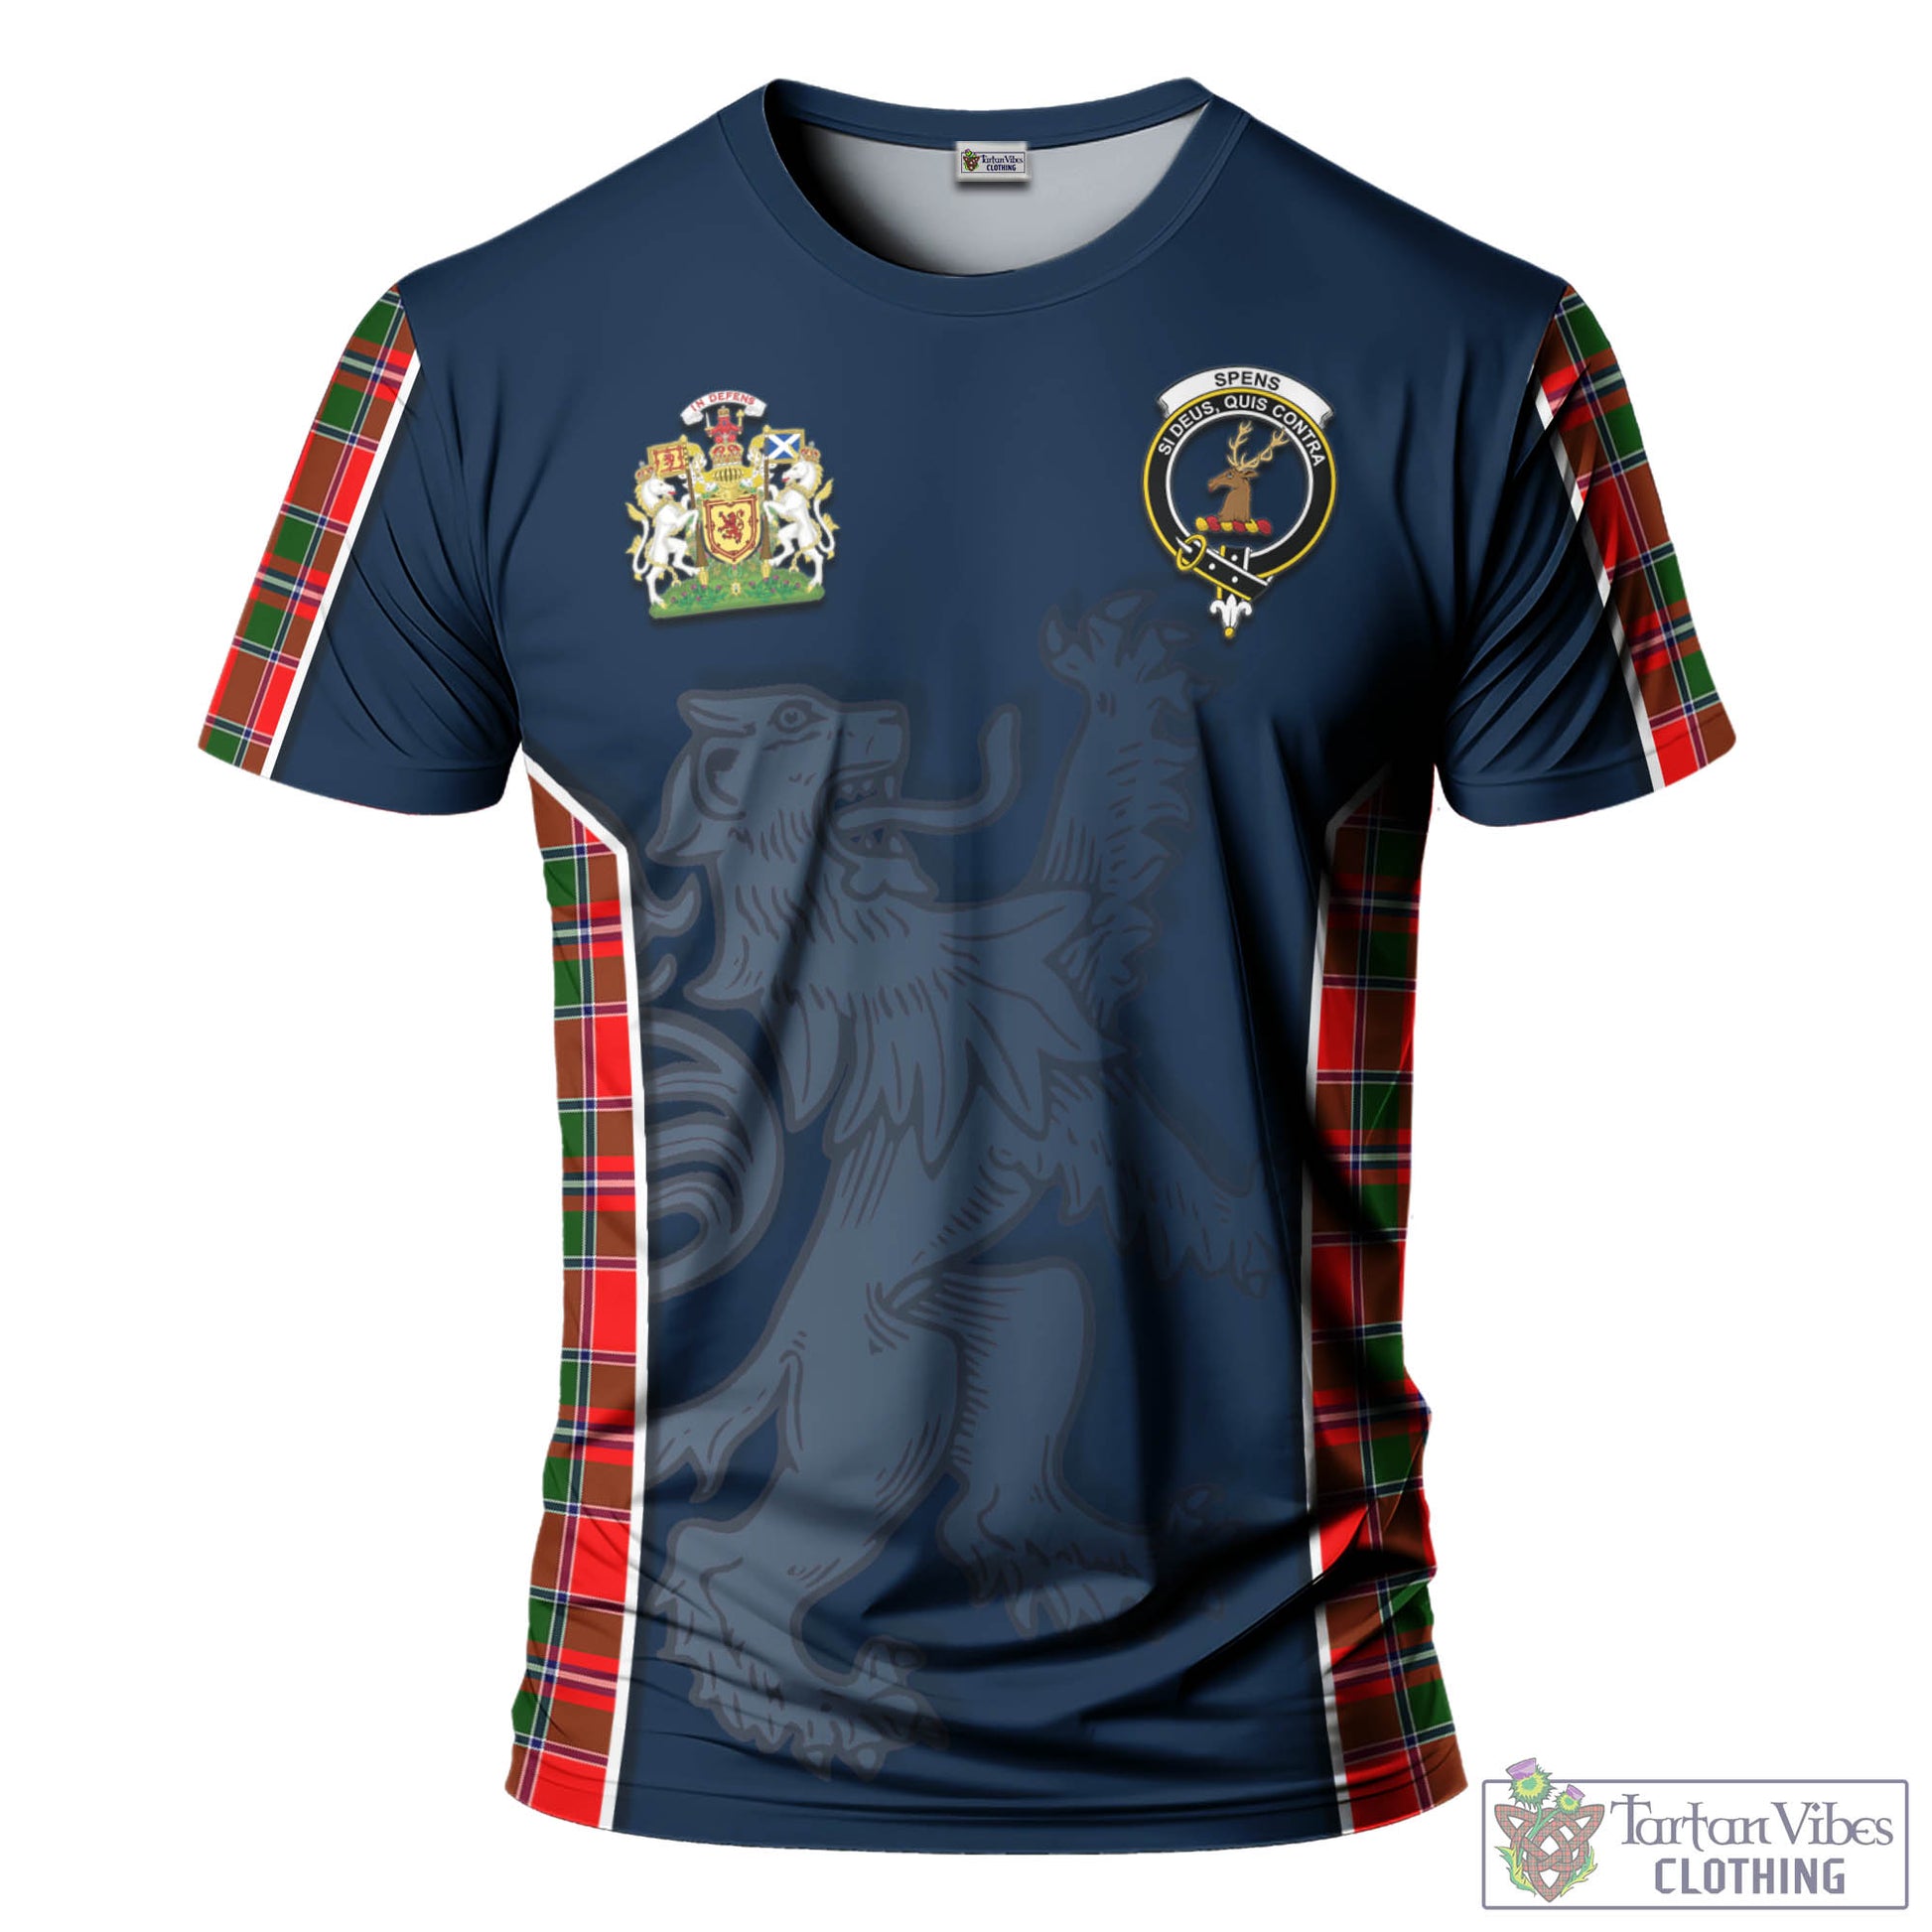 Tartan Vibes Clothing Spens Modern Tartan T-Shirt with Family Crest and Lion Rampant Vibes Sport Style